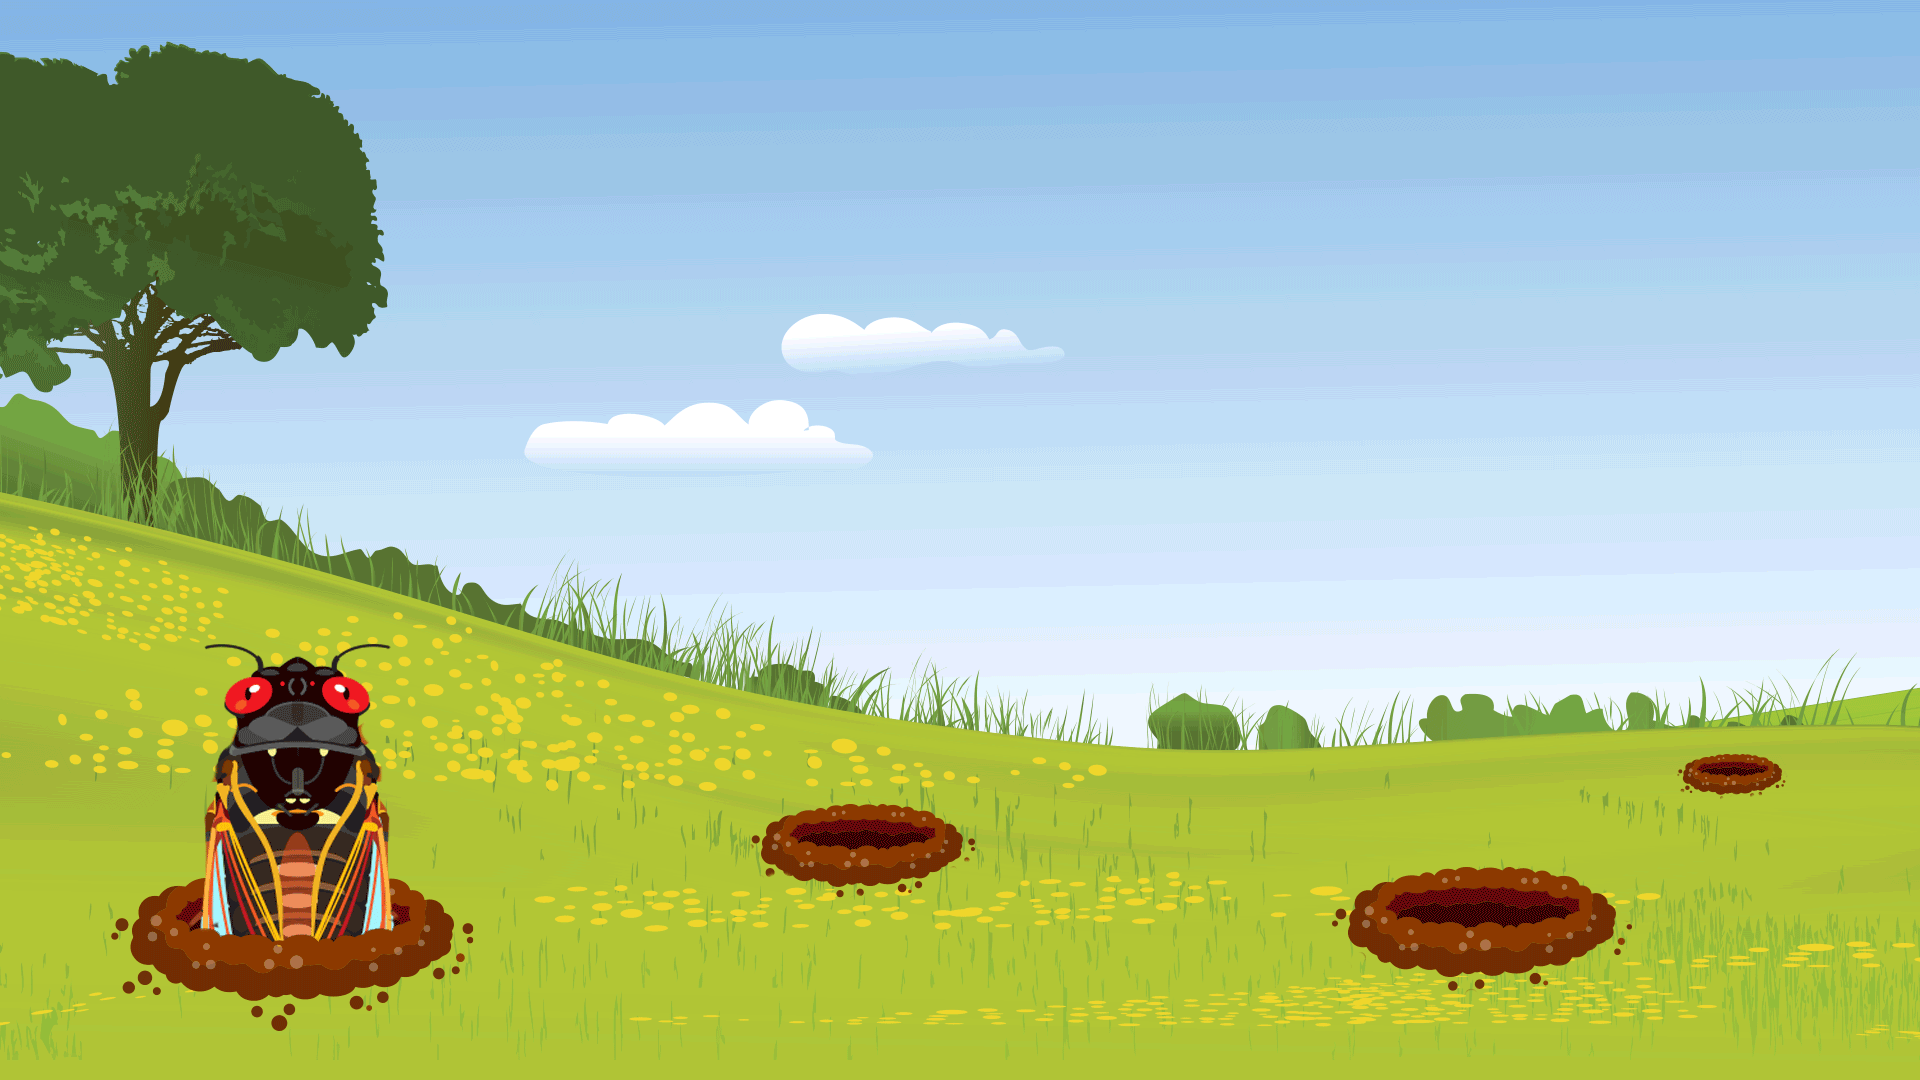 Animation of cicadas emerging and receding into holes in the ground